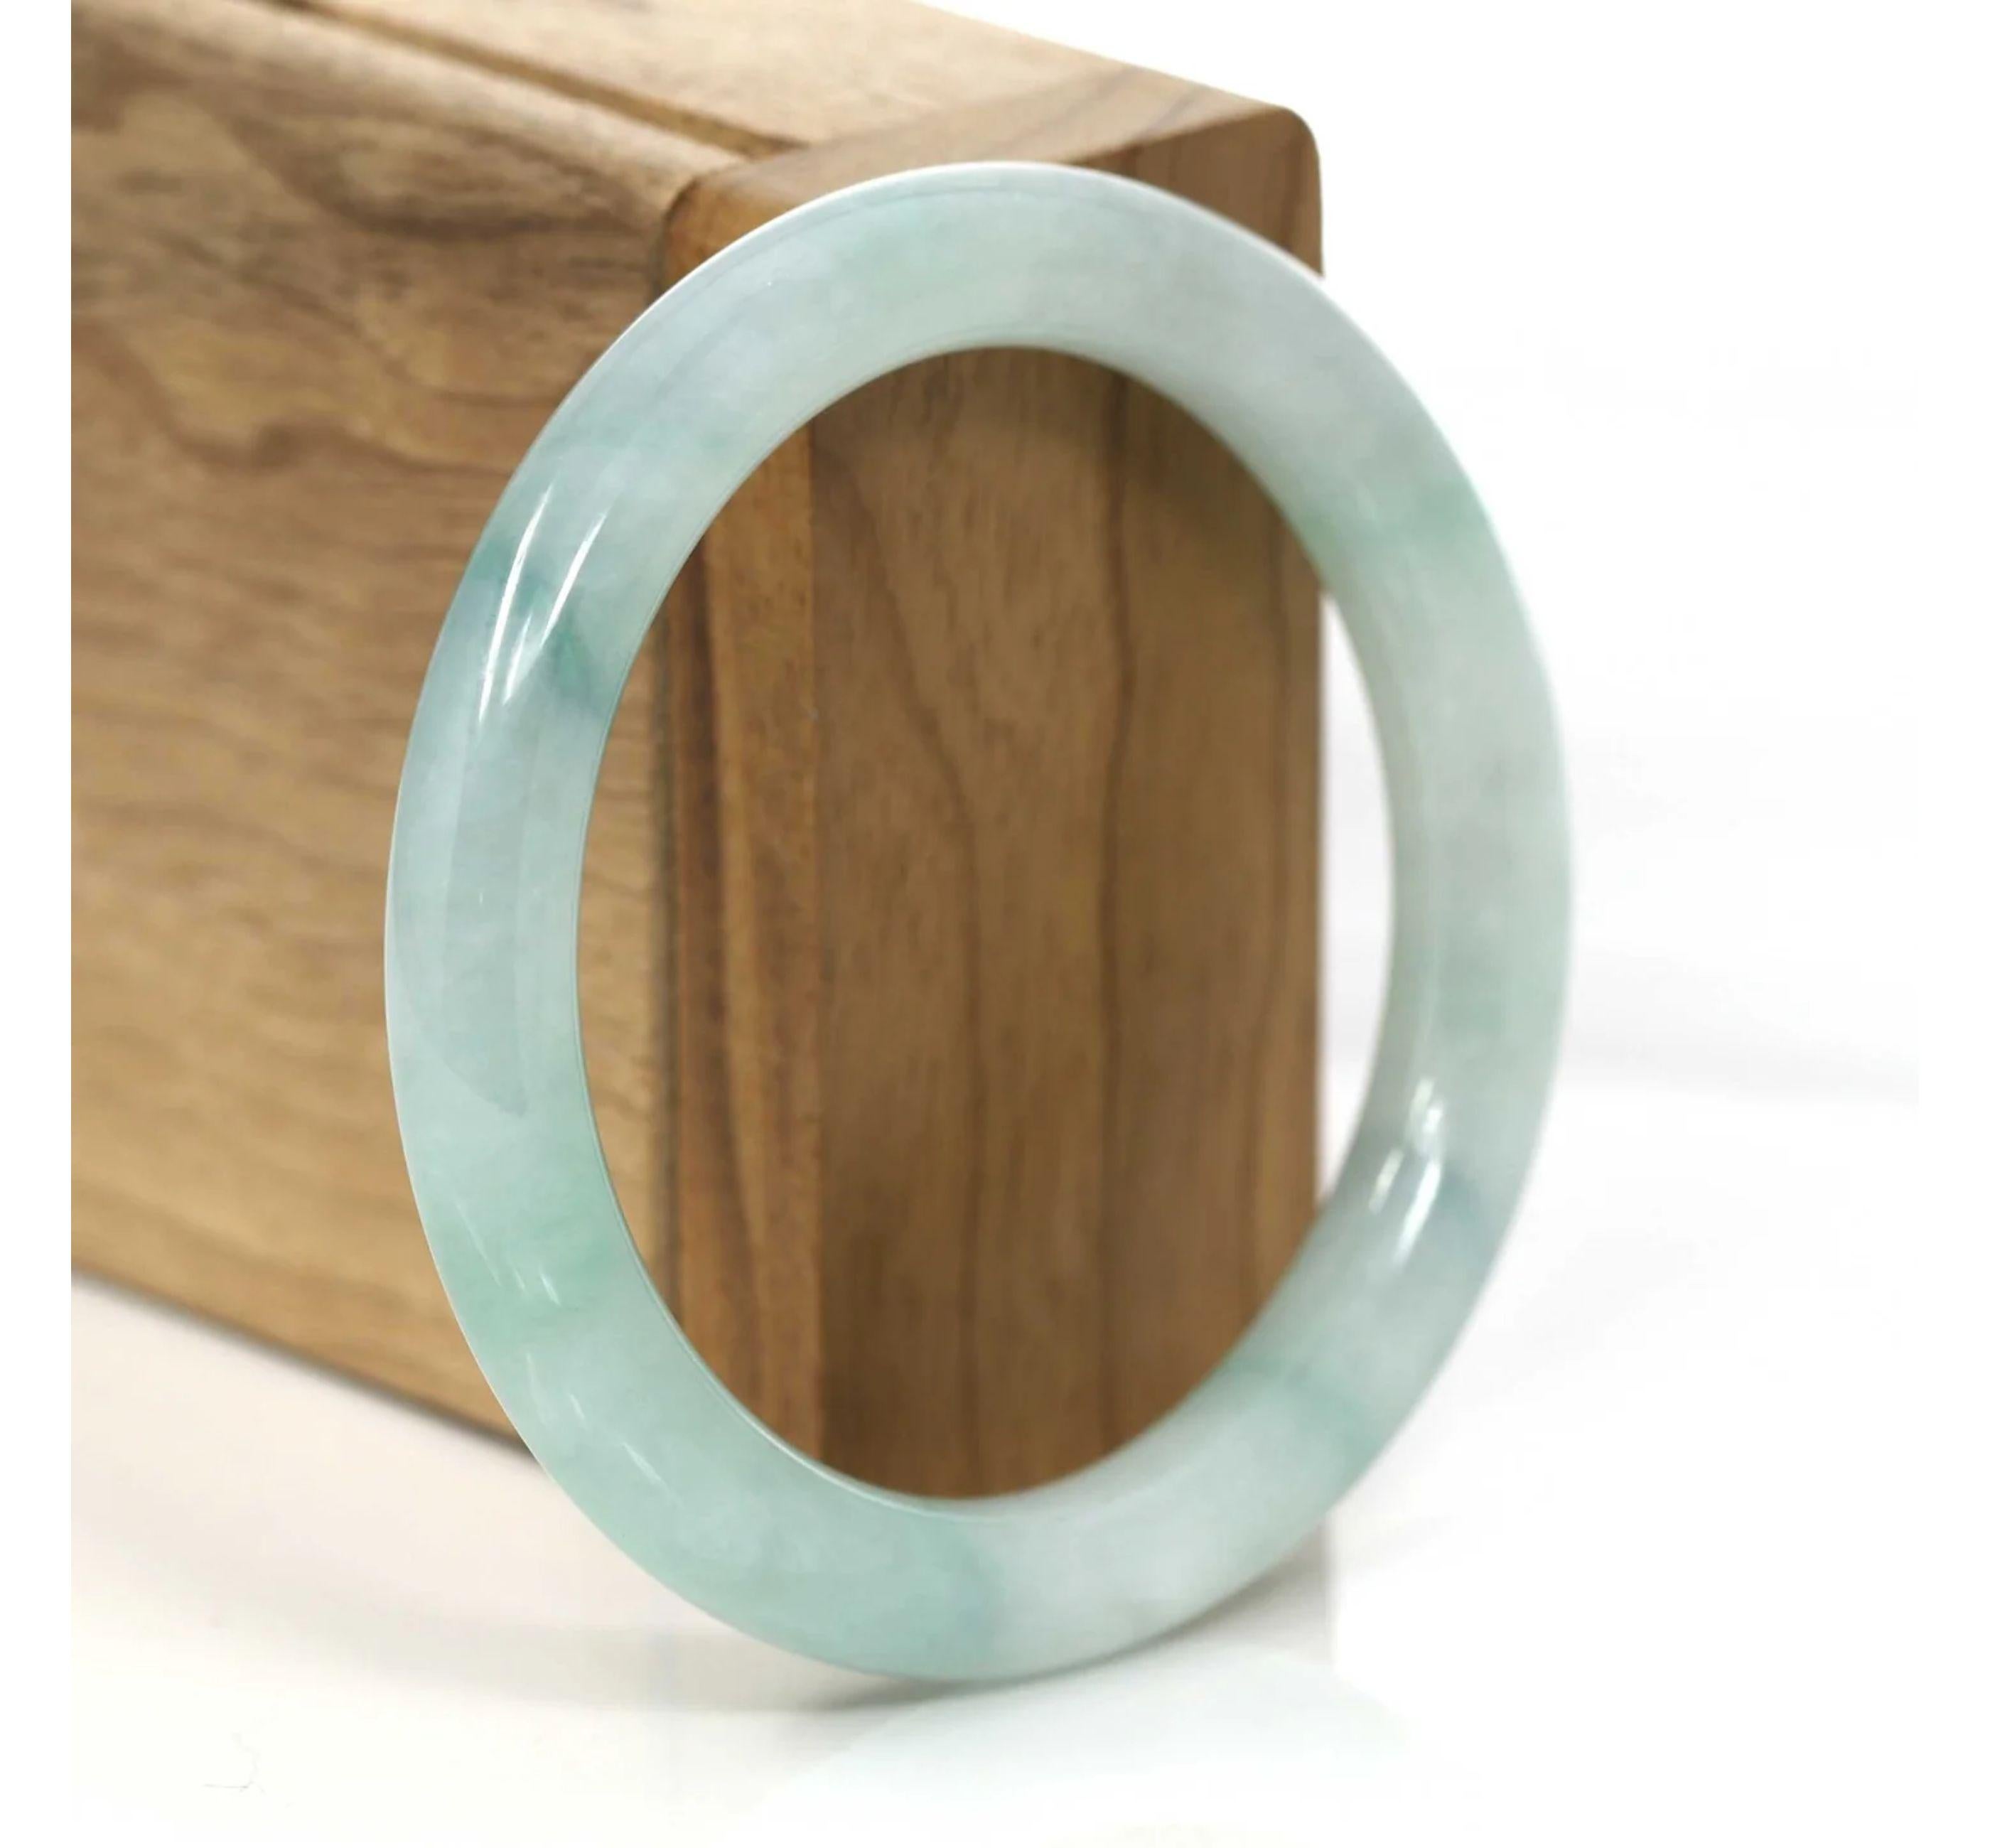 * DETAILS--- Genuine Burmese Jadeite Jade Bangle Bracelet. This bangle is made with genuine Burmese Jadeite jade, The jade texture is very smooth and translucent with green color inside. The green color looks very nice with ice texture. It's a very